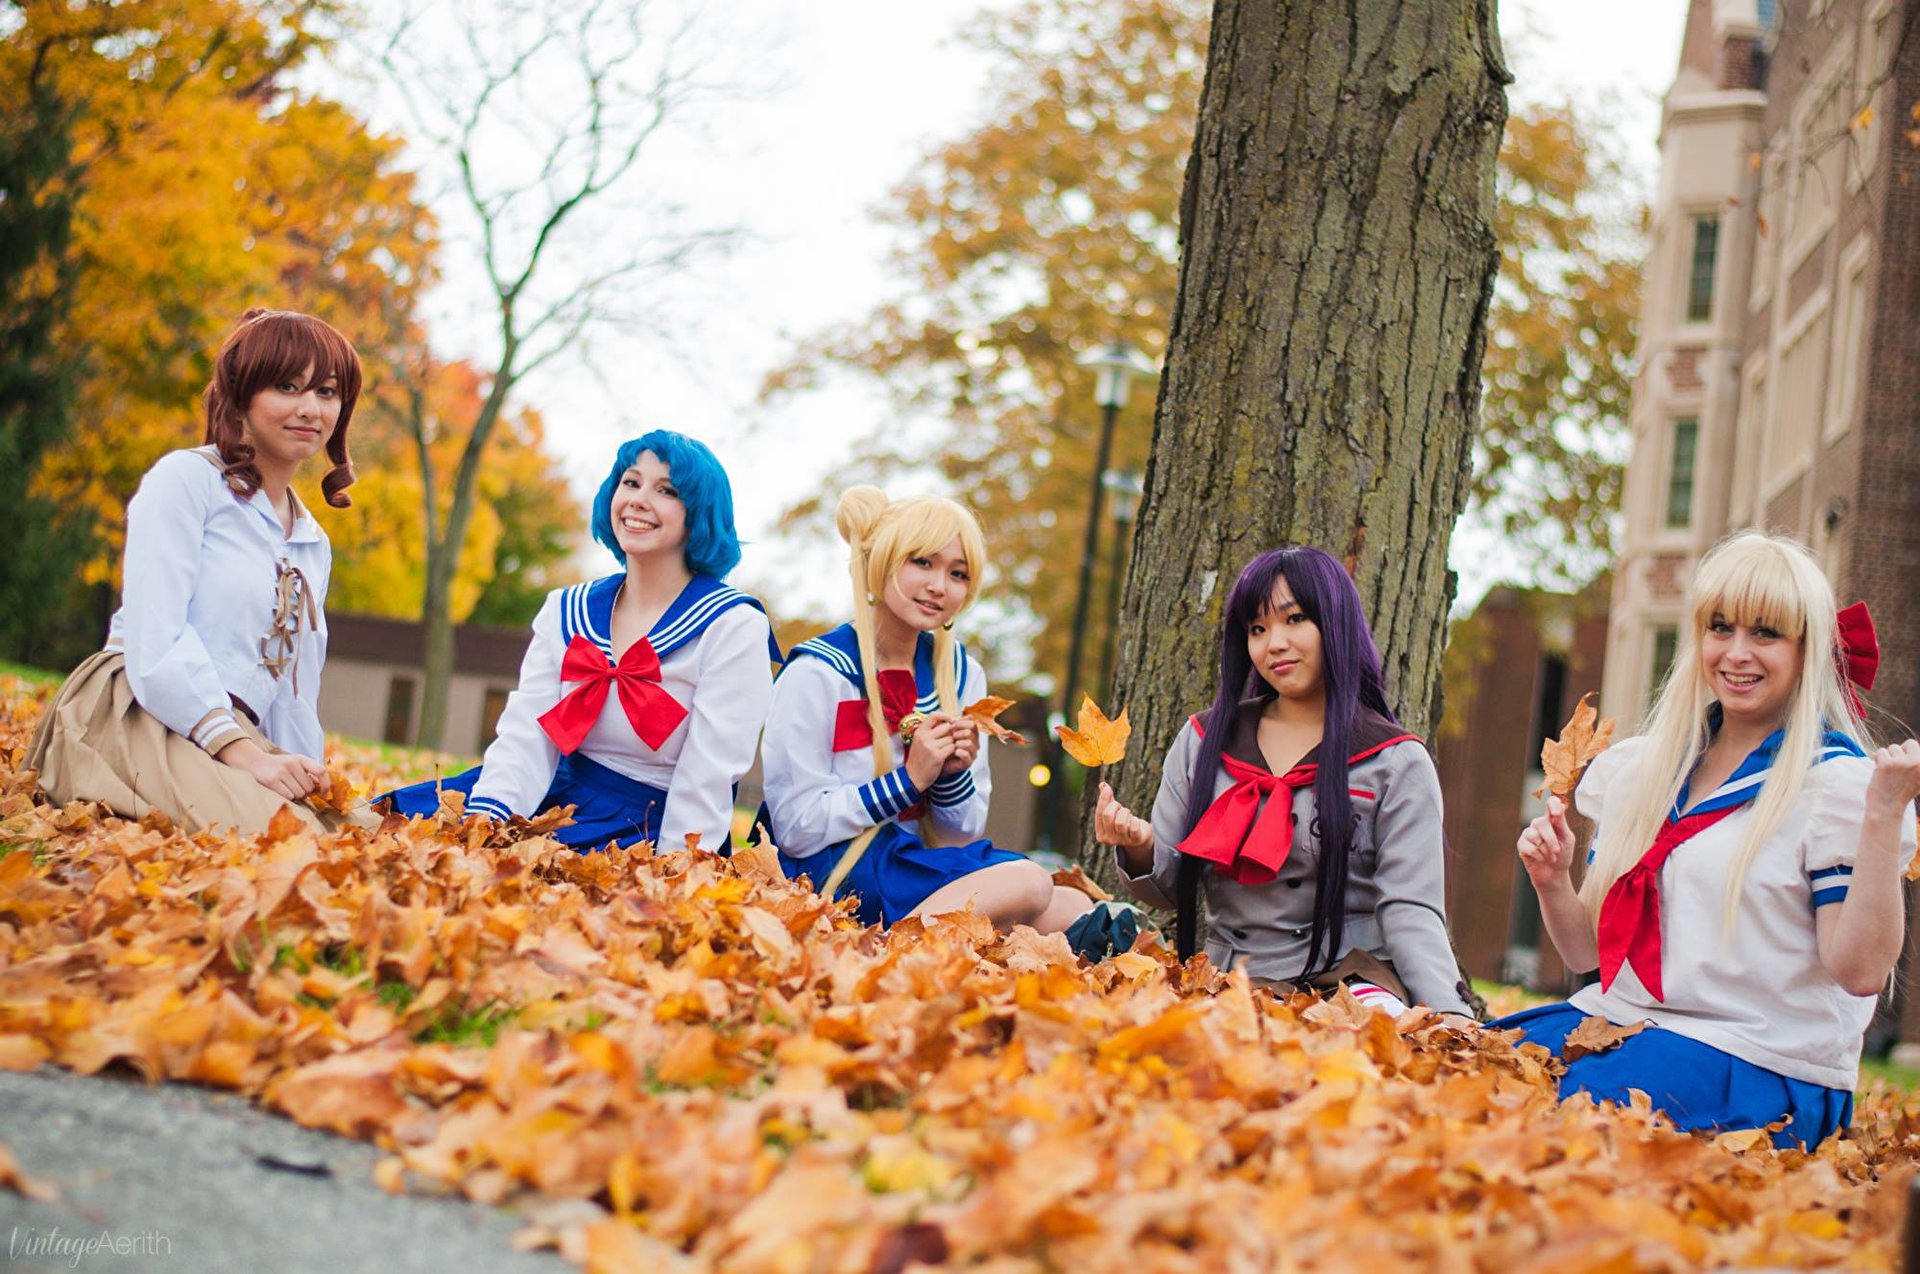 Cospix.net photo featuring VintageAerith, Lunatique Rose, and Lavendula Cosplay